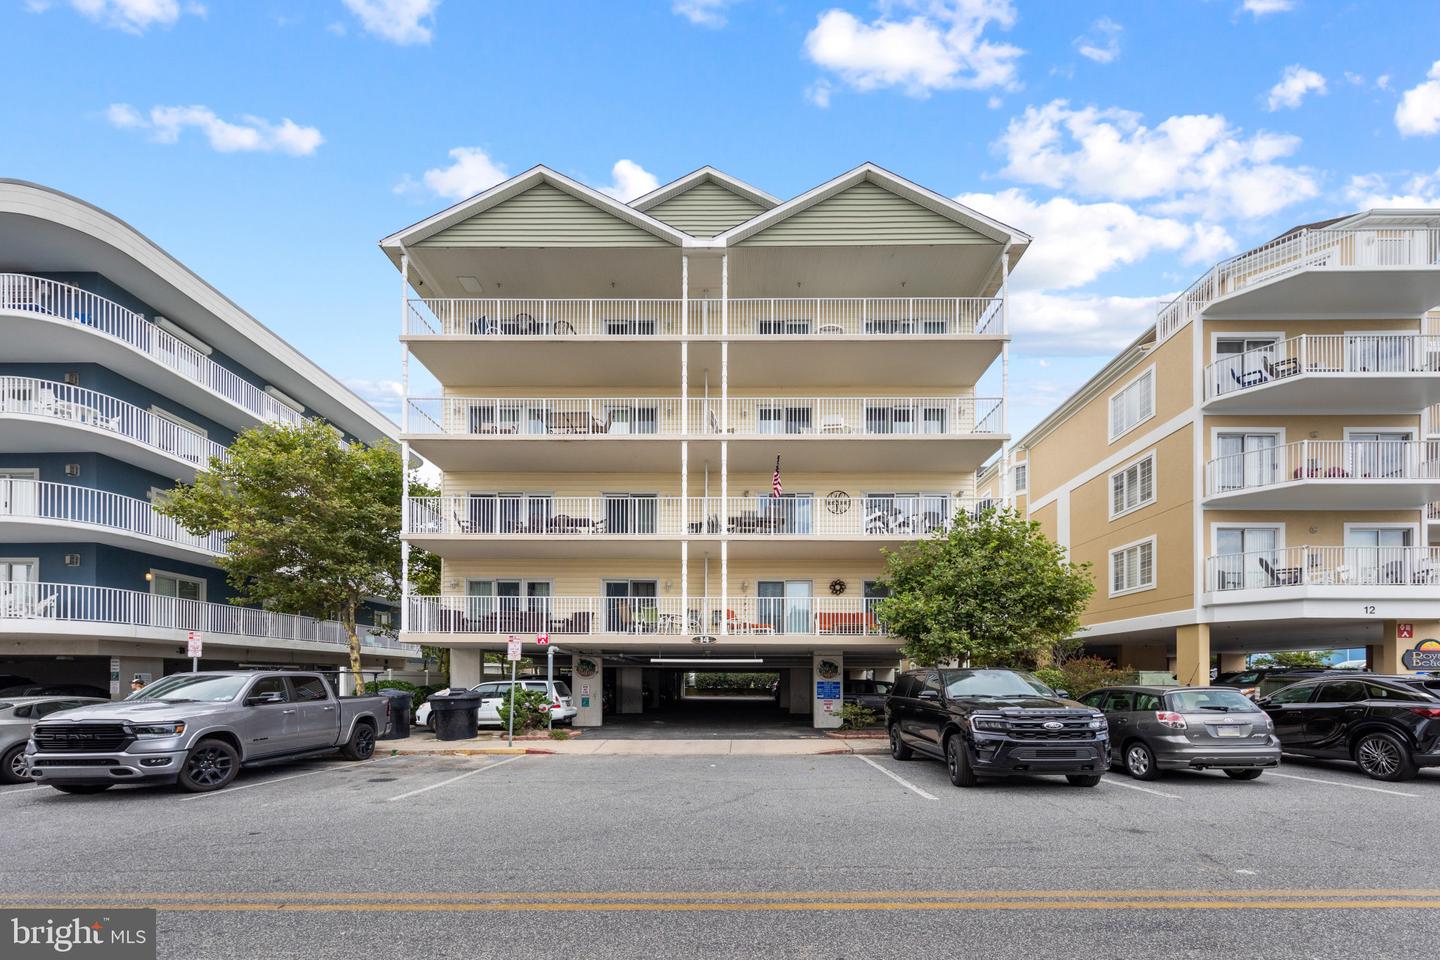 MDWO2015322-802498055916-2024-04-16-15-31-31 14 45th St #203 | Ocean City, MD Real Estate For Sale | MLS# Mdwo2015322  - 1st Choice Properties